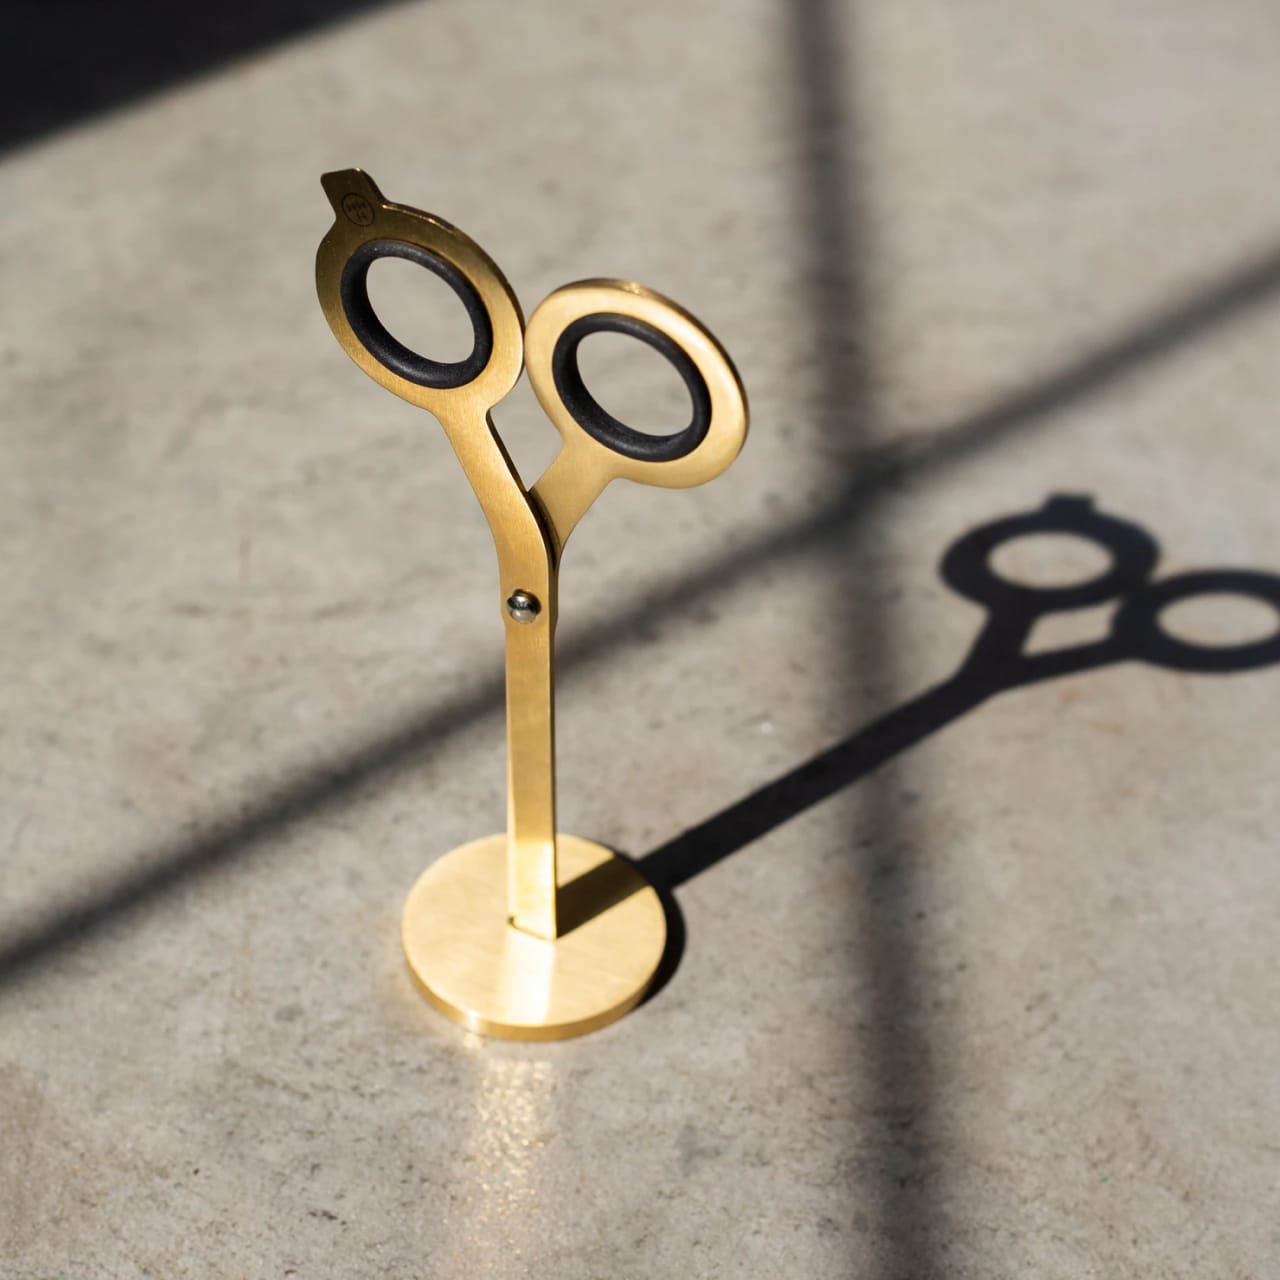 Brass scissors with geometric design, black steel finger holes, and included upright brass stand.